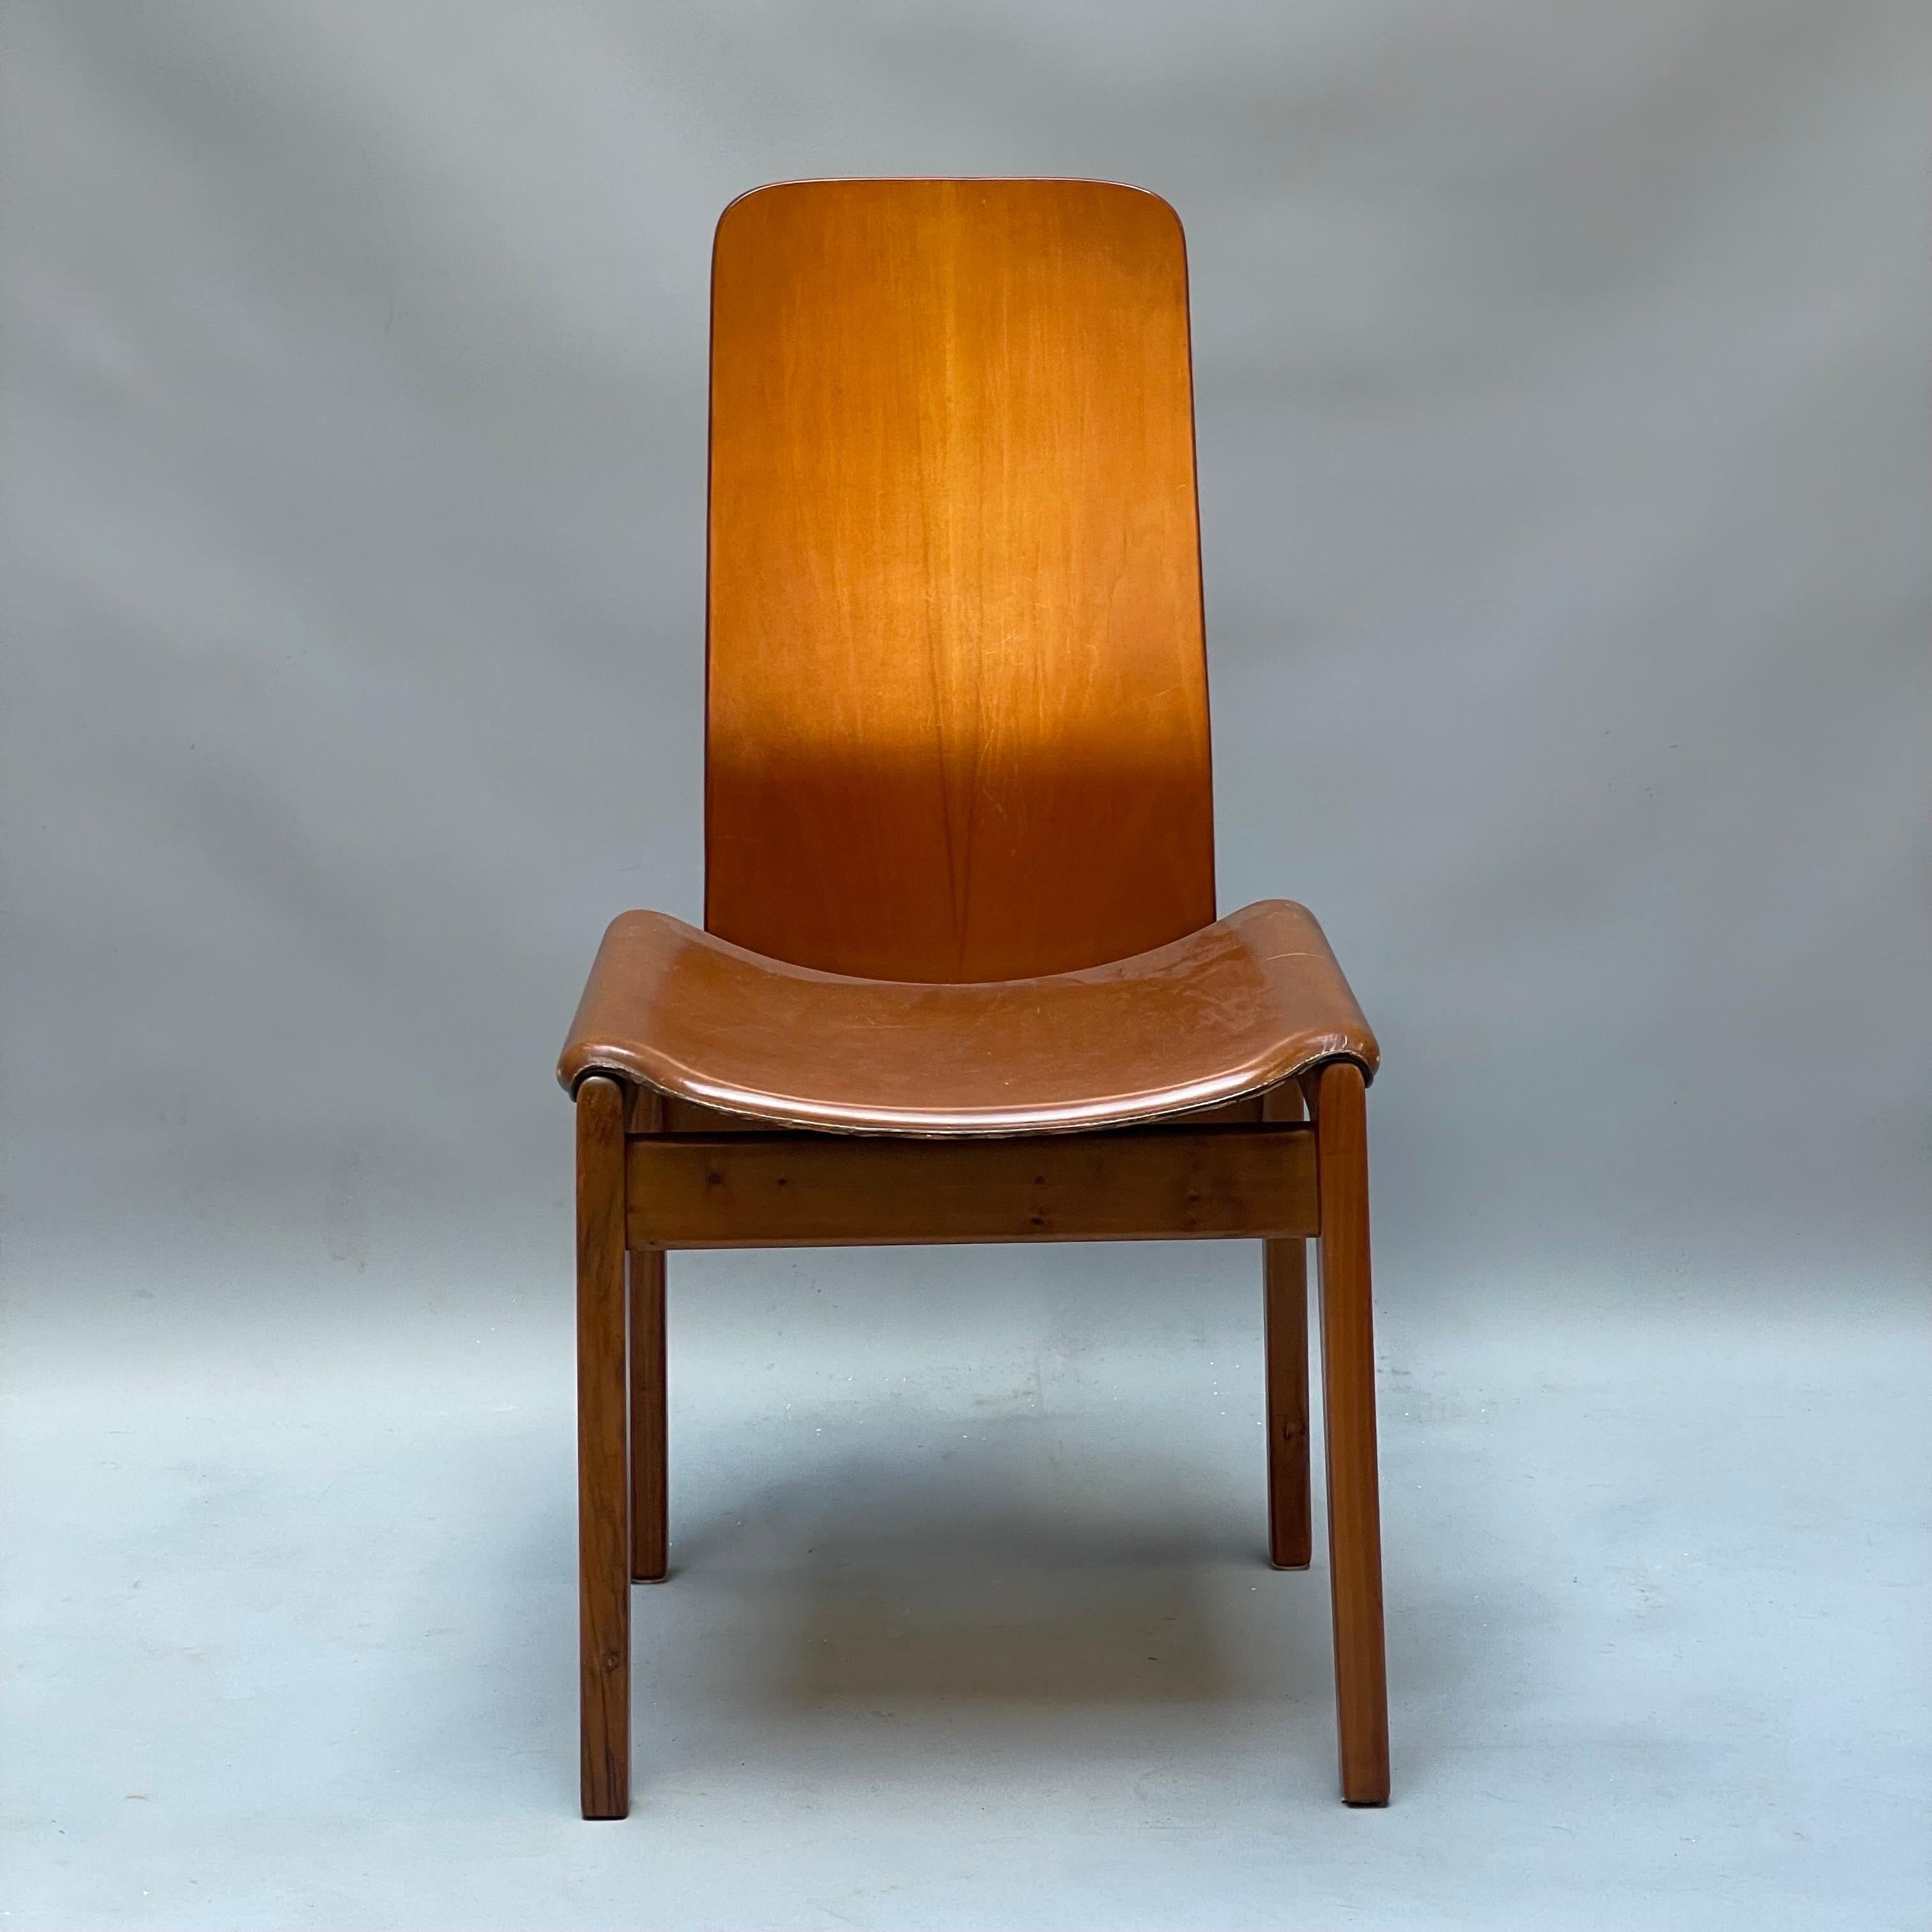 These chairs belong to the Fiorenza series, designed by Tito Agnoli, 1960s for Molteni. The chairs are in excellent condition, they have only a few small signs.
Throughout the 1950s, ‘60s, and ‘70s, Agnoli designed prolifically in the fields of